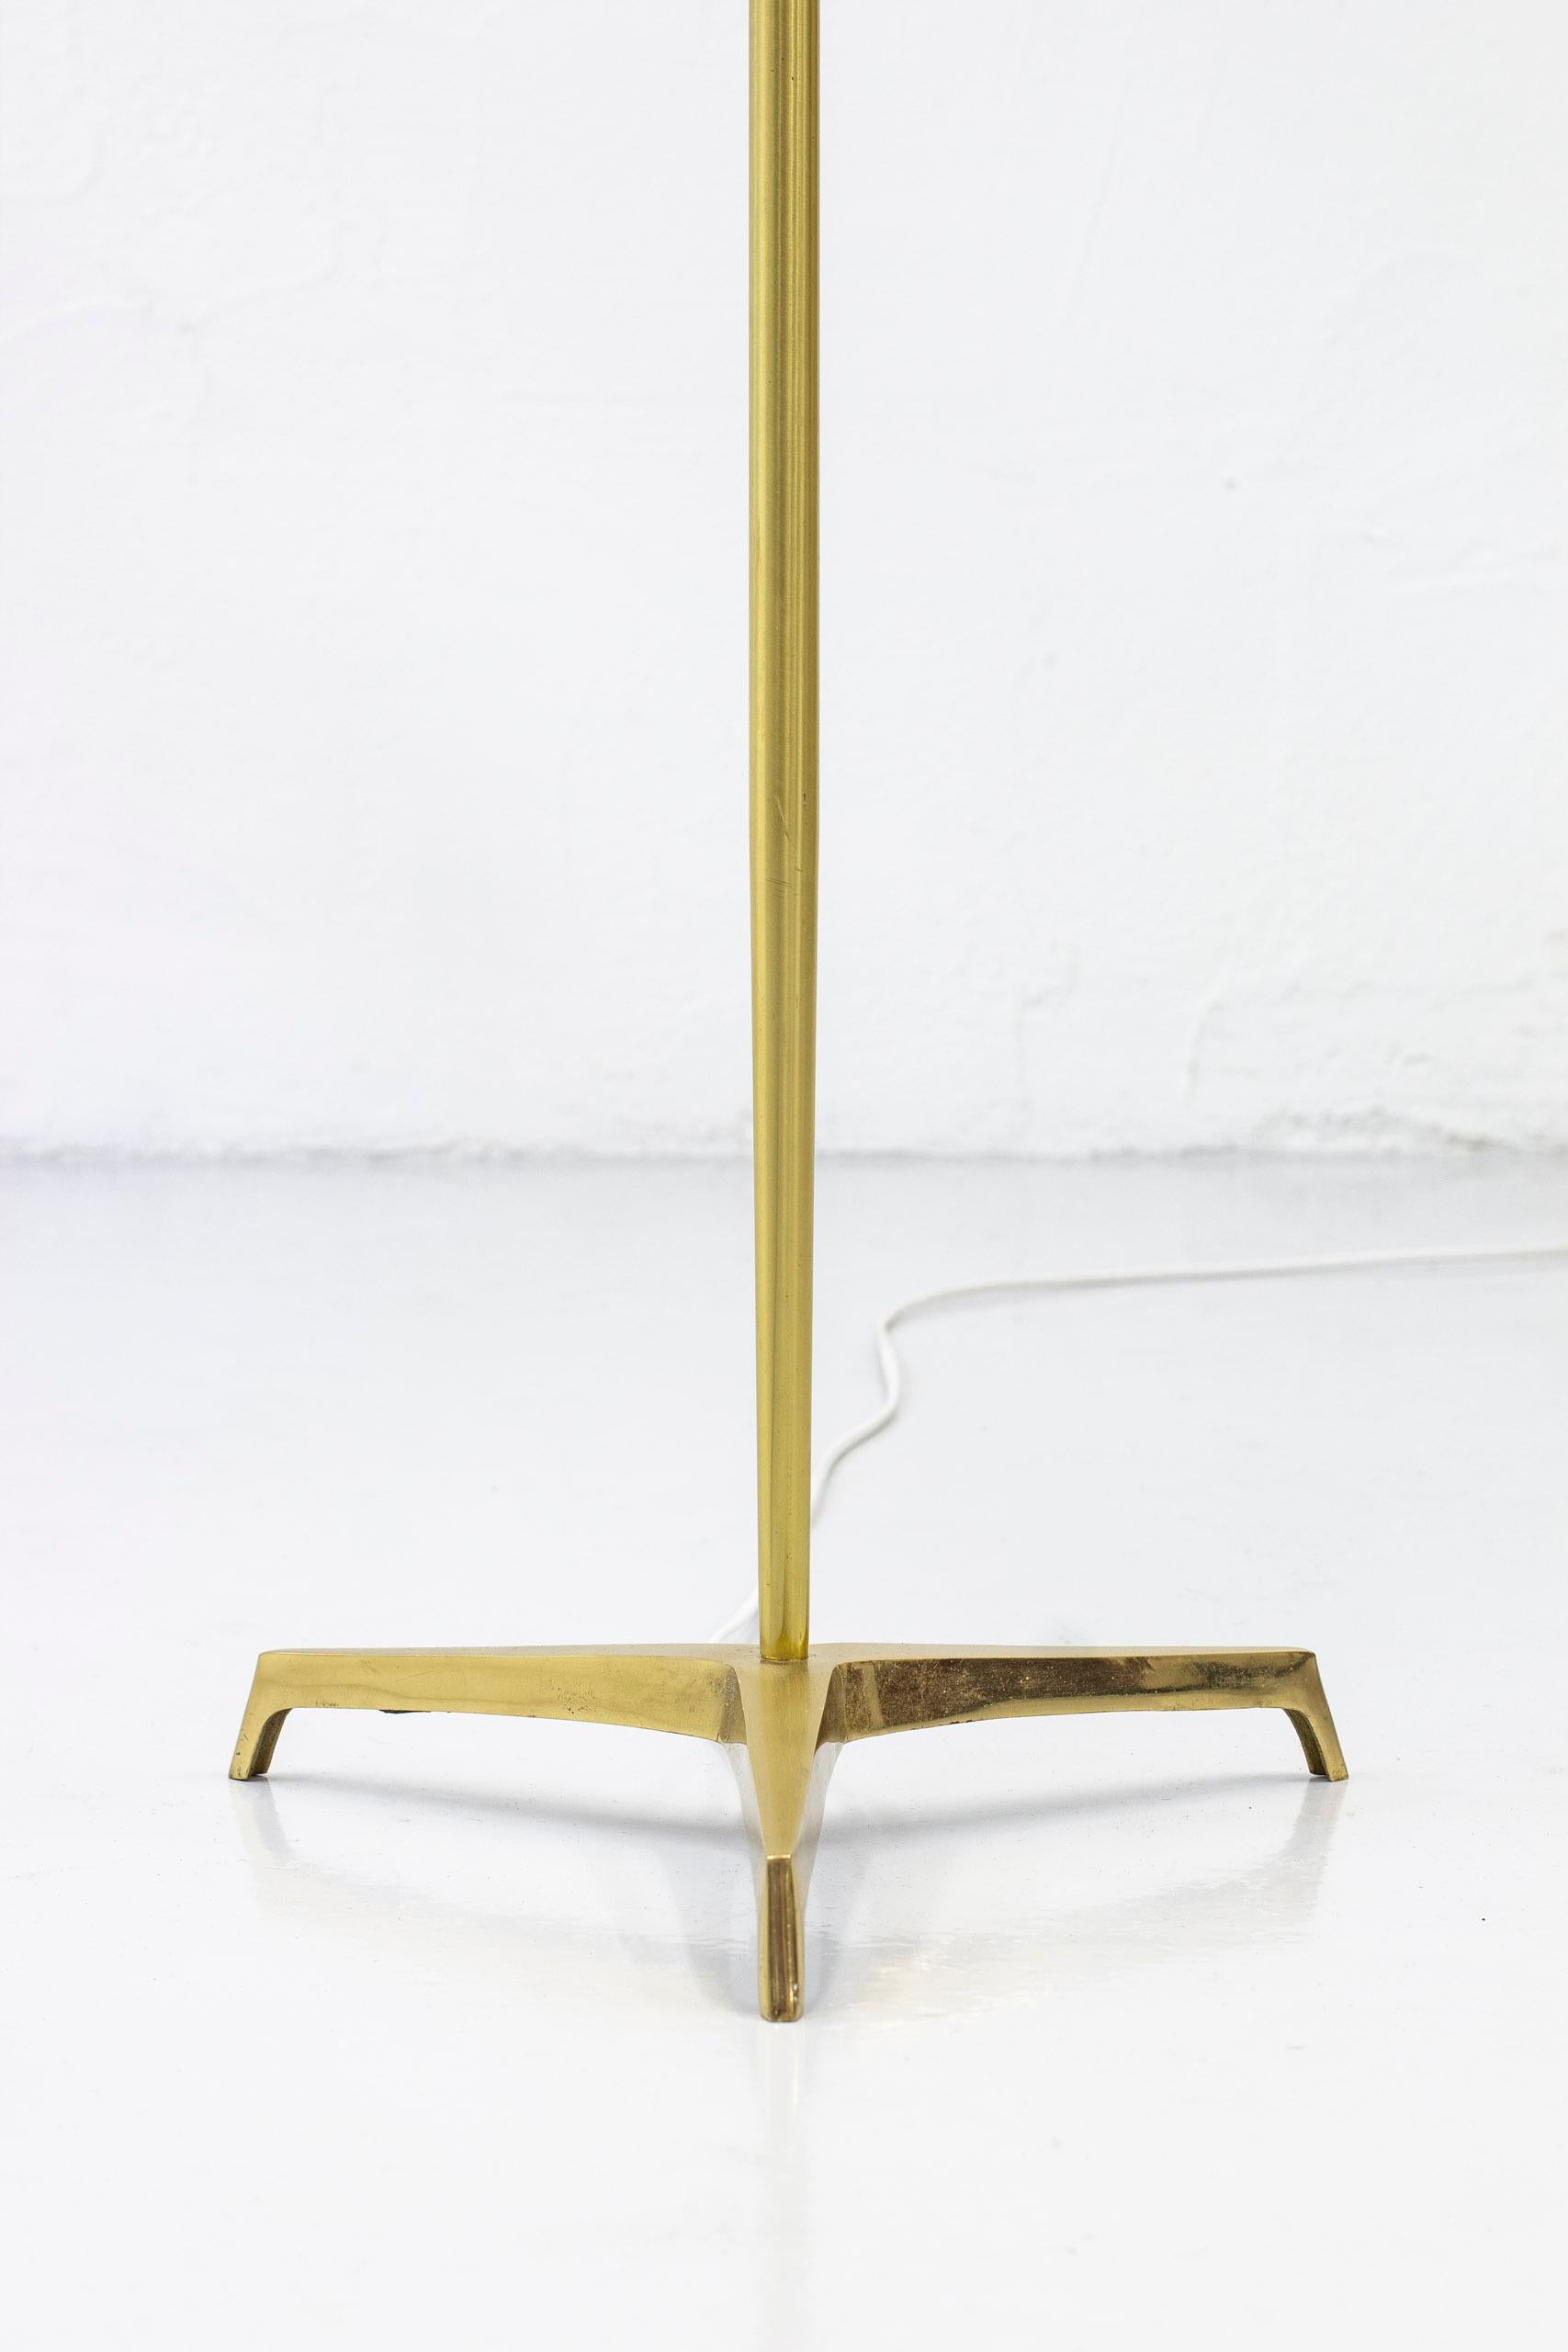 Mid-20th Century Swedish Tripod Floor Lamp in Polished Brass and Linen, Sweden, 1950s For Sale